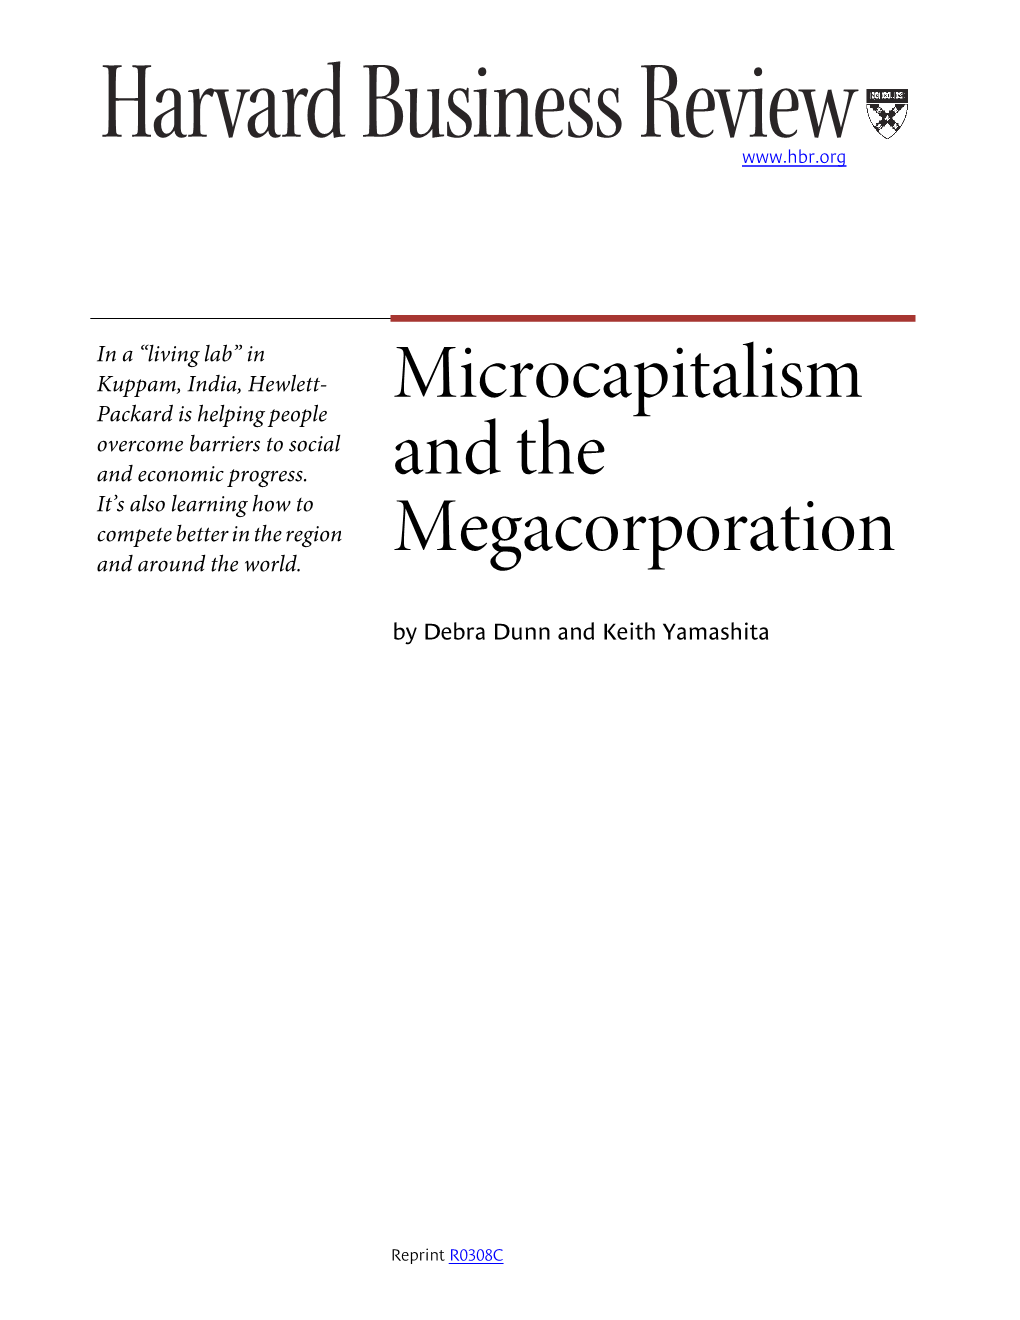 Microcapitalism and the Megacorporation